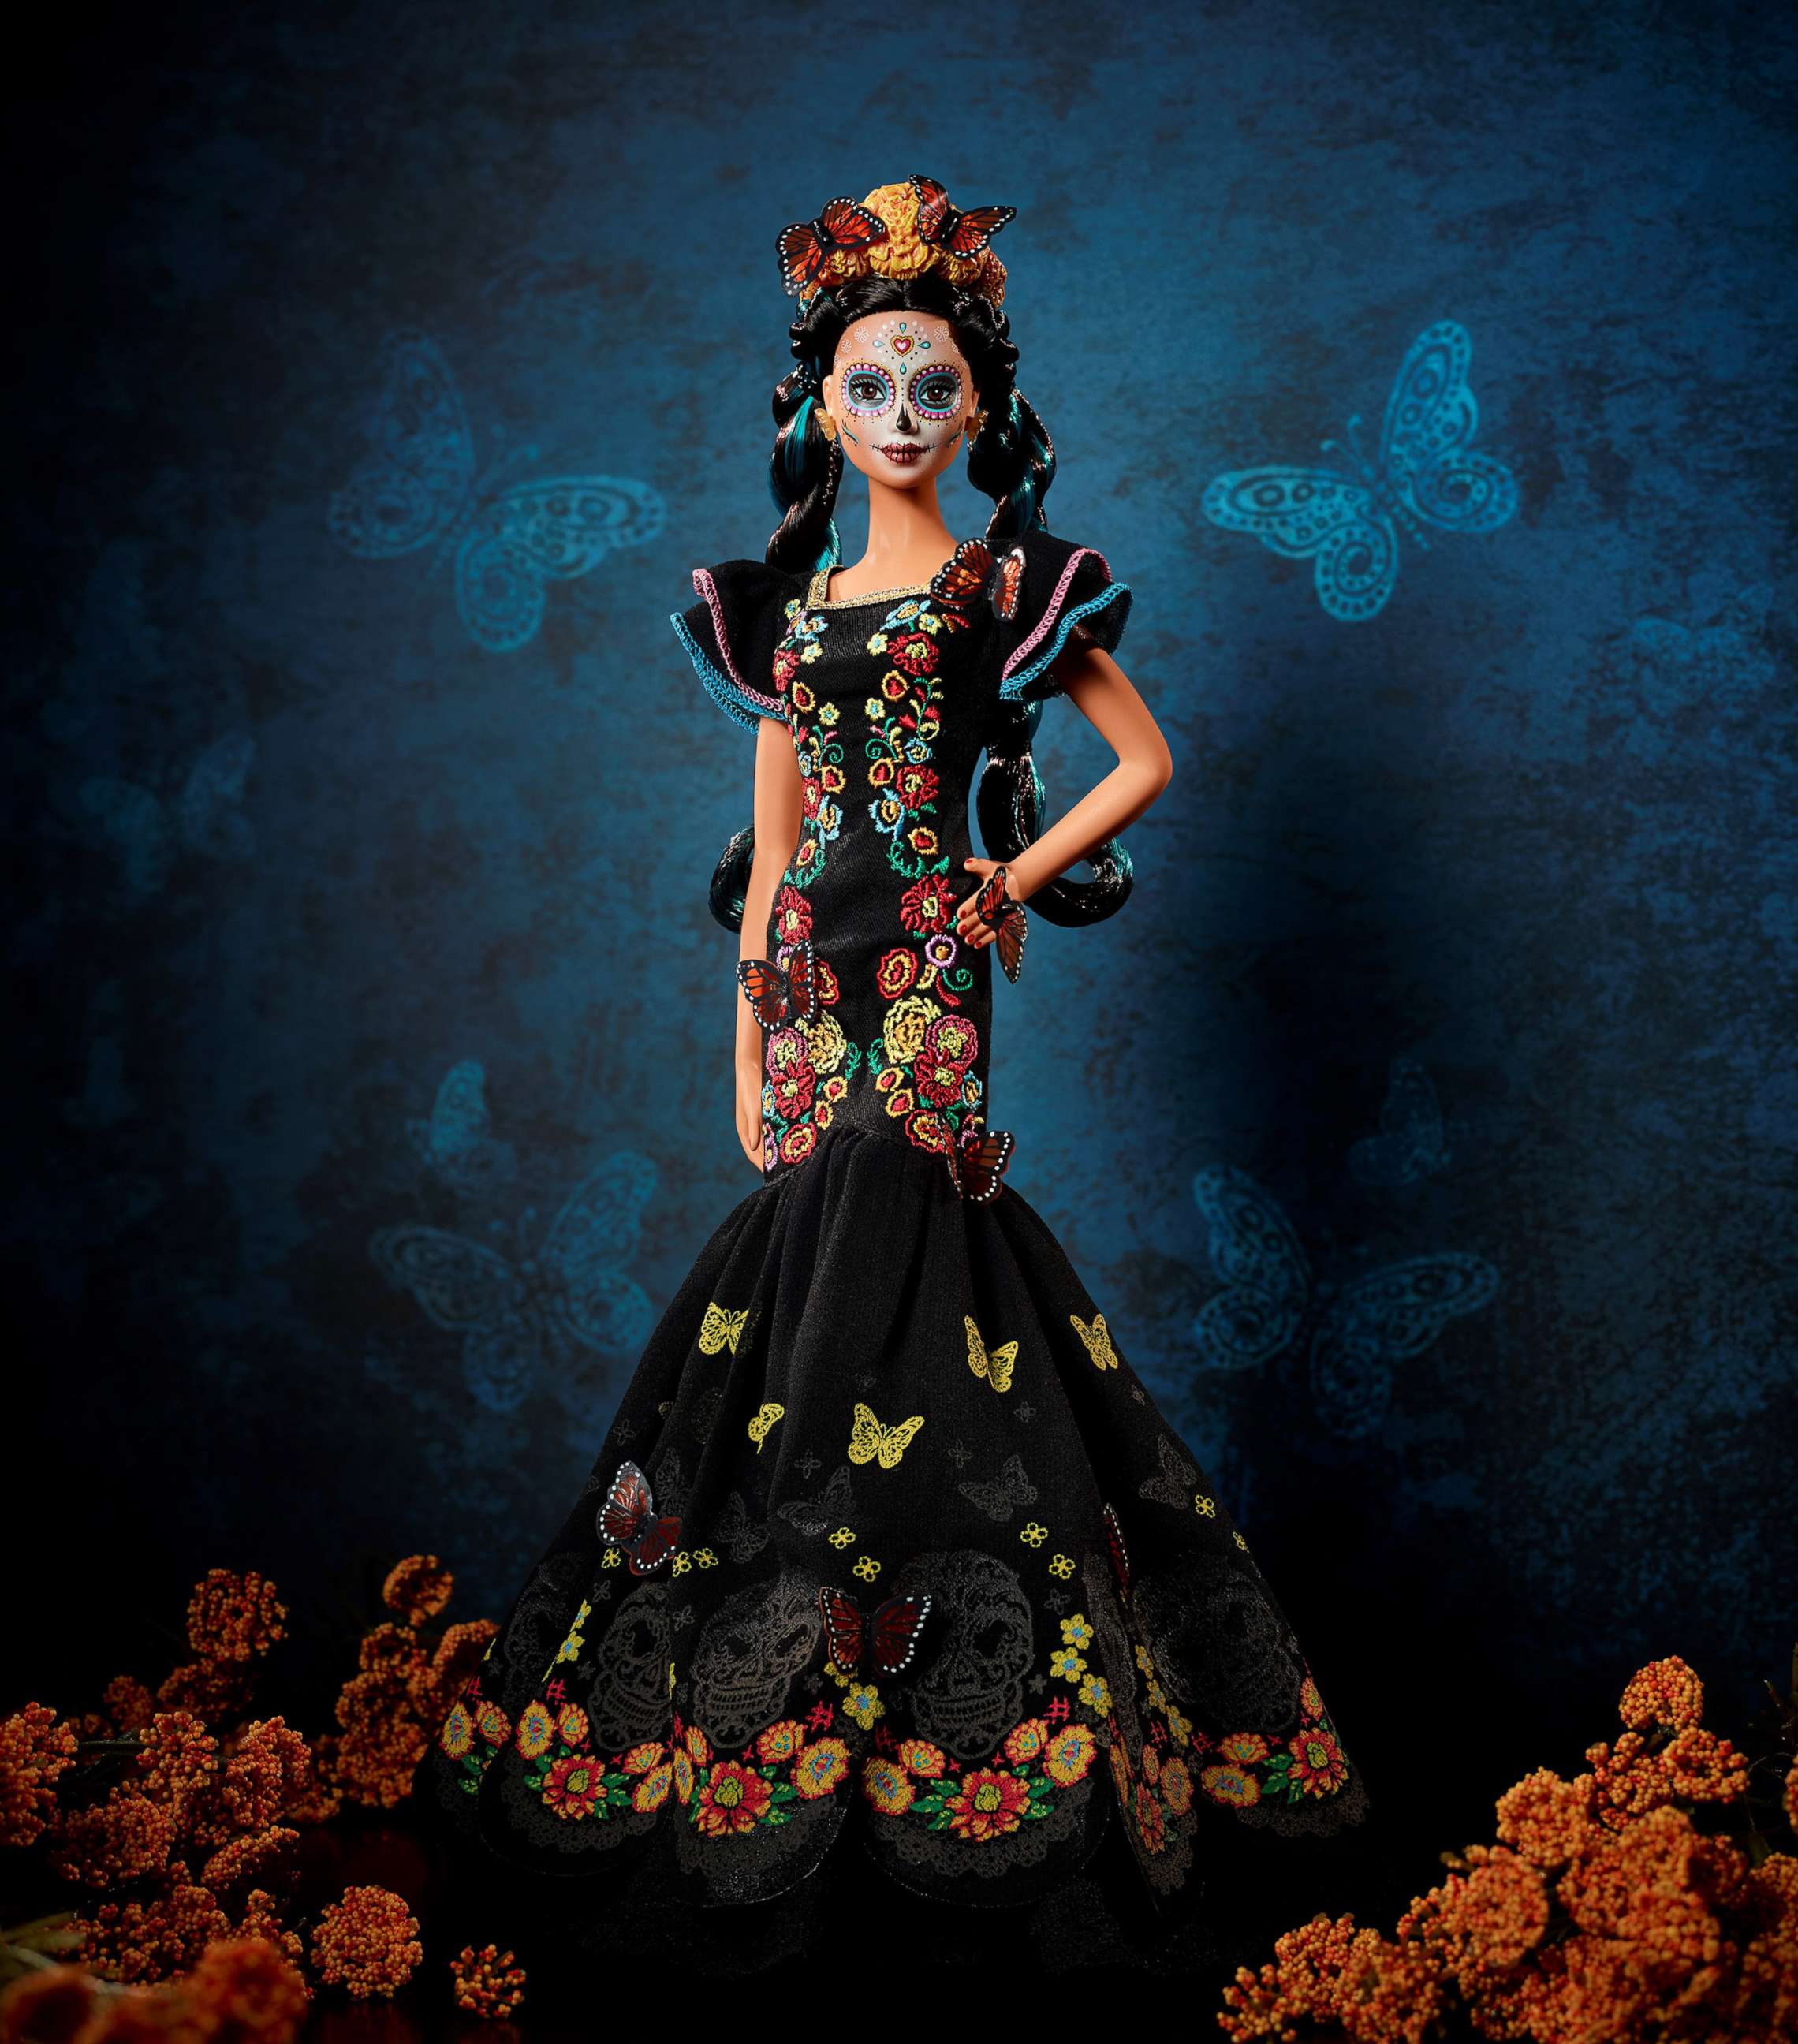 PHOTO: Mattel launches Barbie special edition as tribute to Mexican Day of the Dead, August 27, 2019.